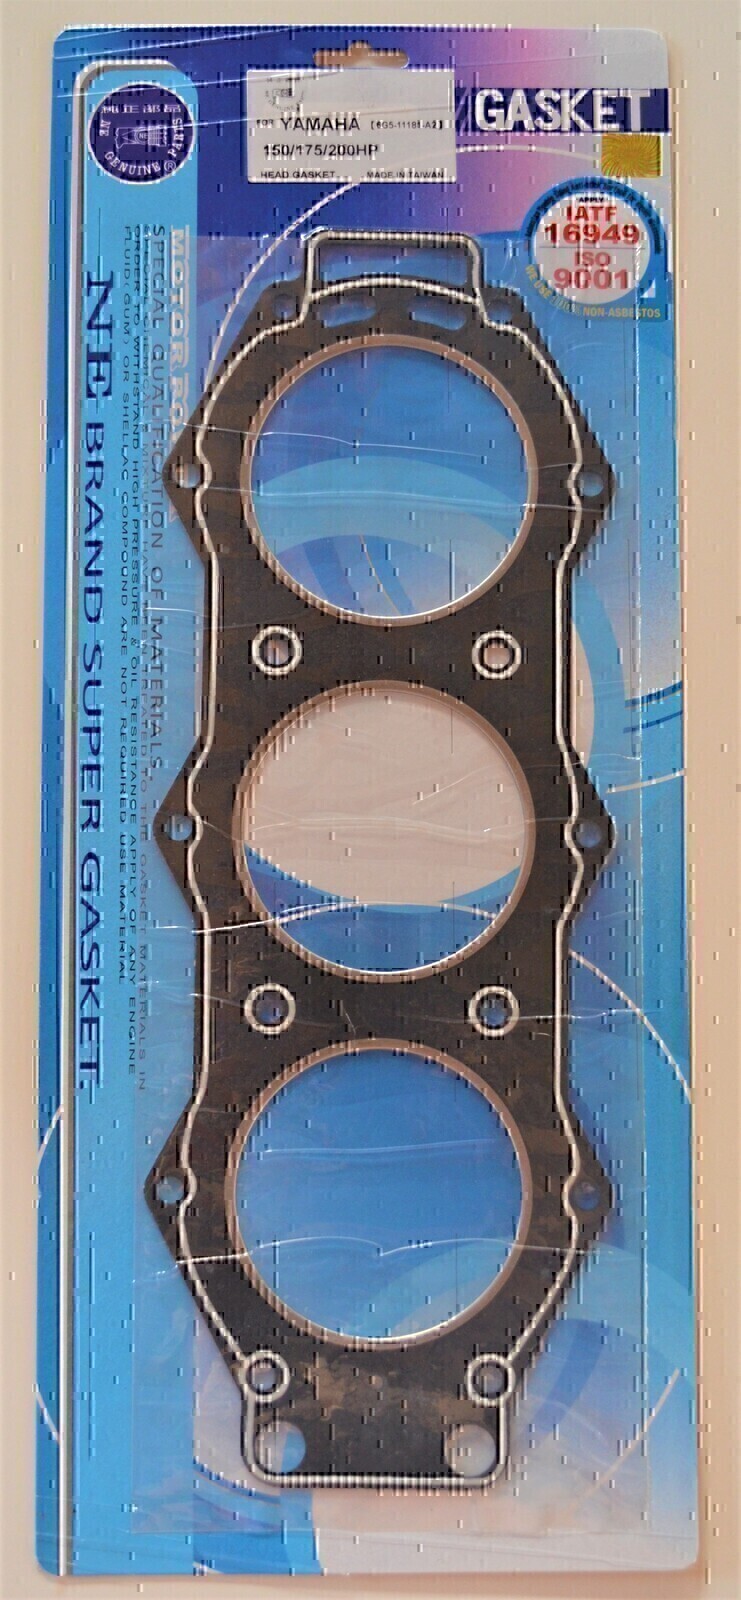 HEAD GASKET FOR YAMAHA 150HP 175HP 200HP 1987 - 2011 OUTBOARD MOTOR # 6G5-11181-A2